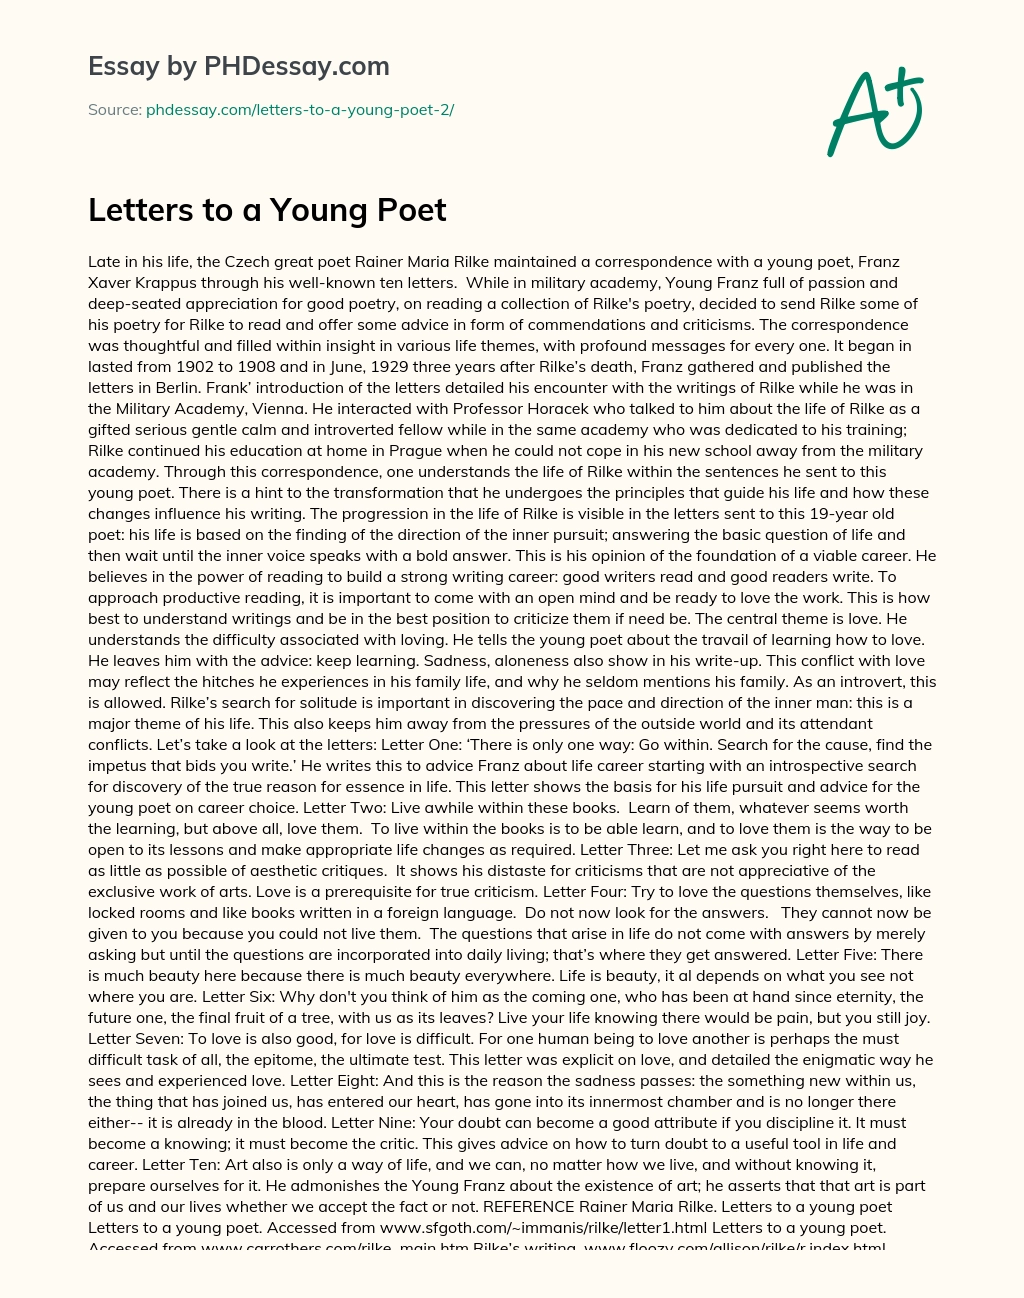 Letters to a Young Poet essay